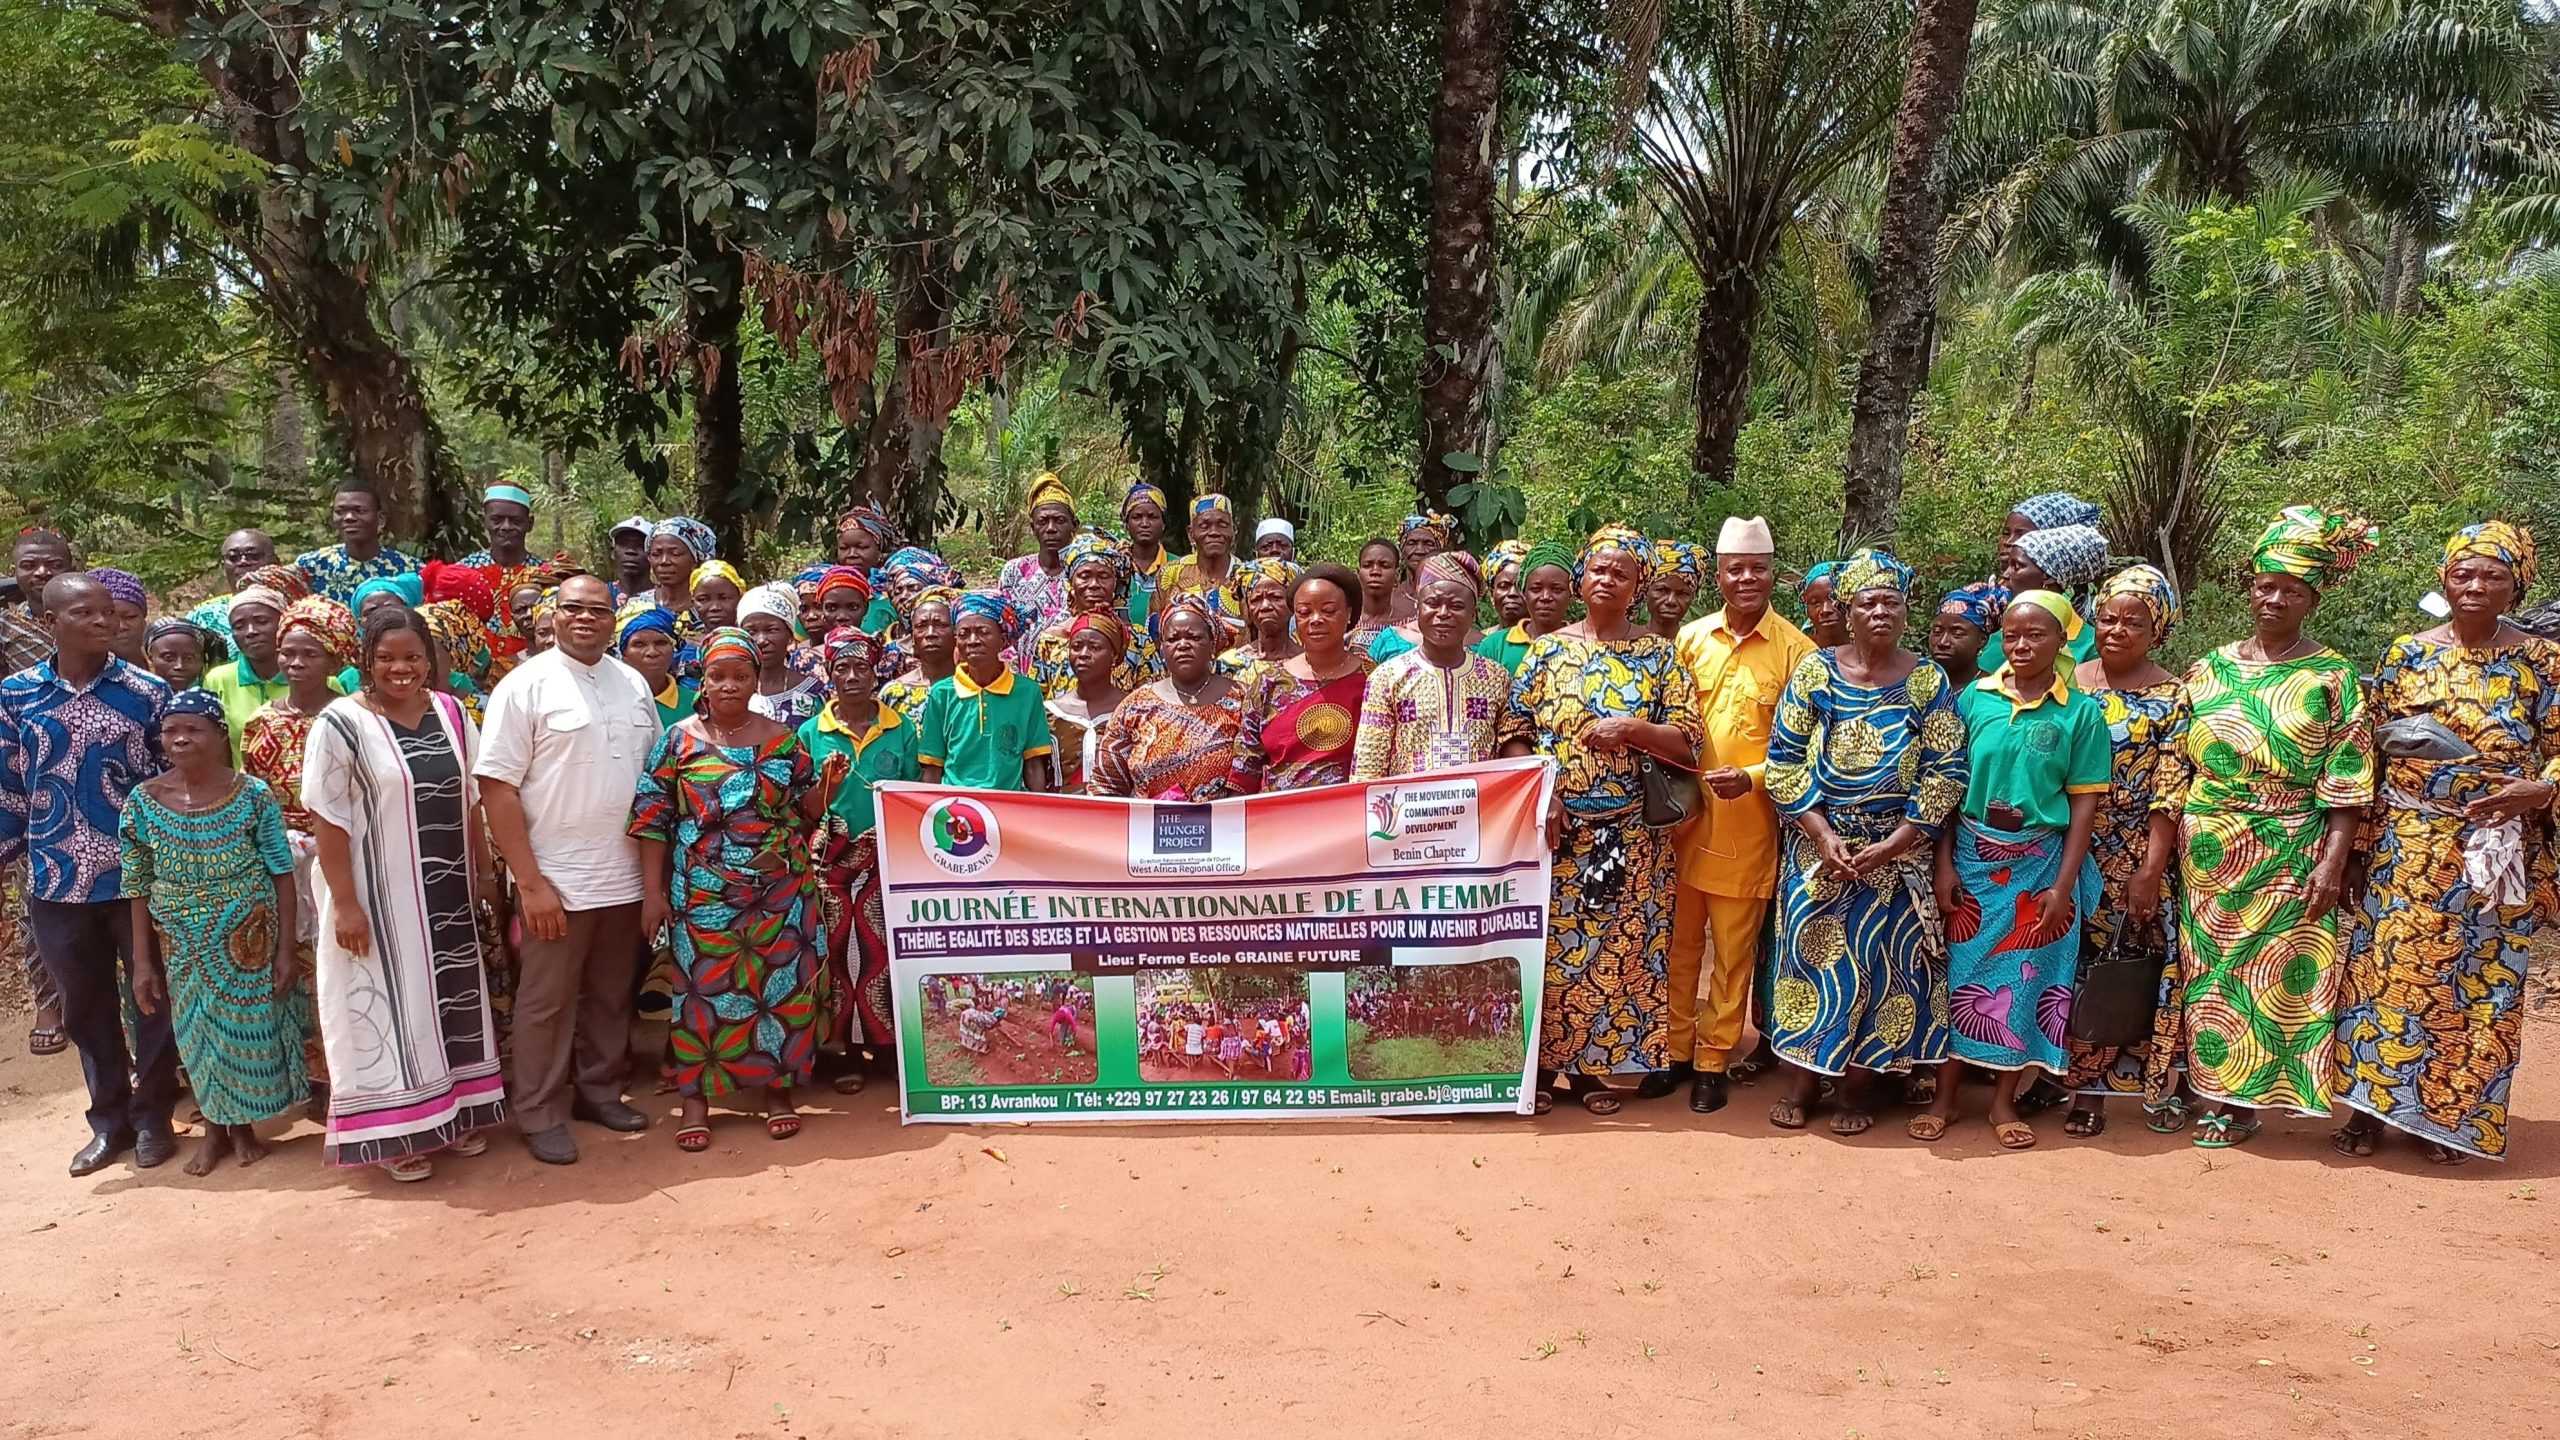 Celebrating Women and the Environment in Benin